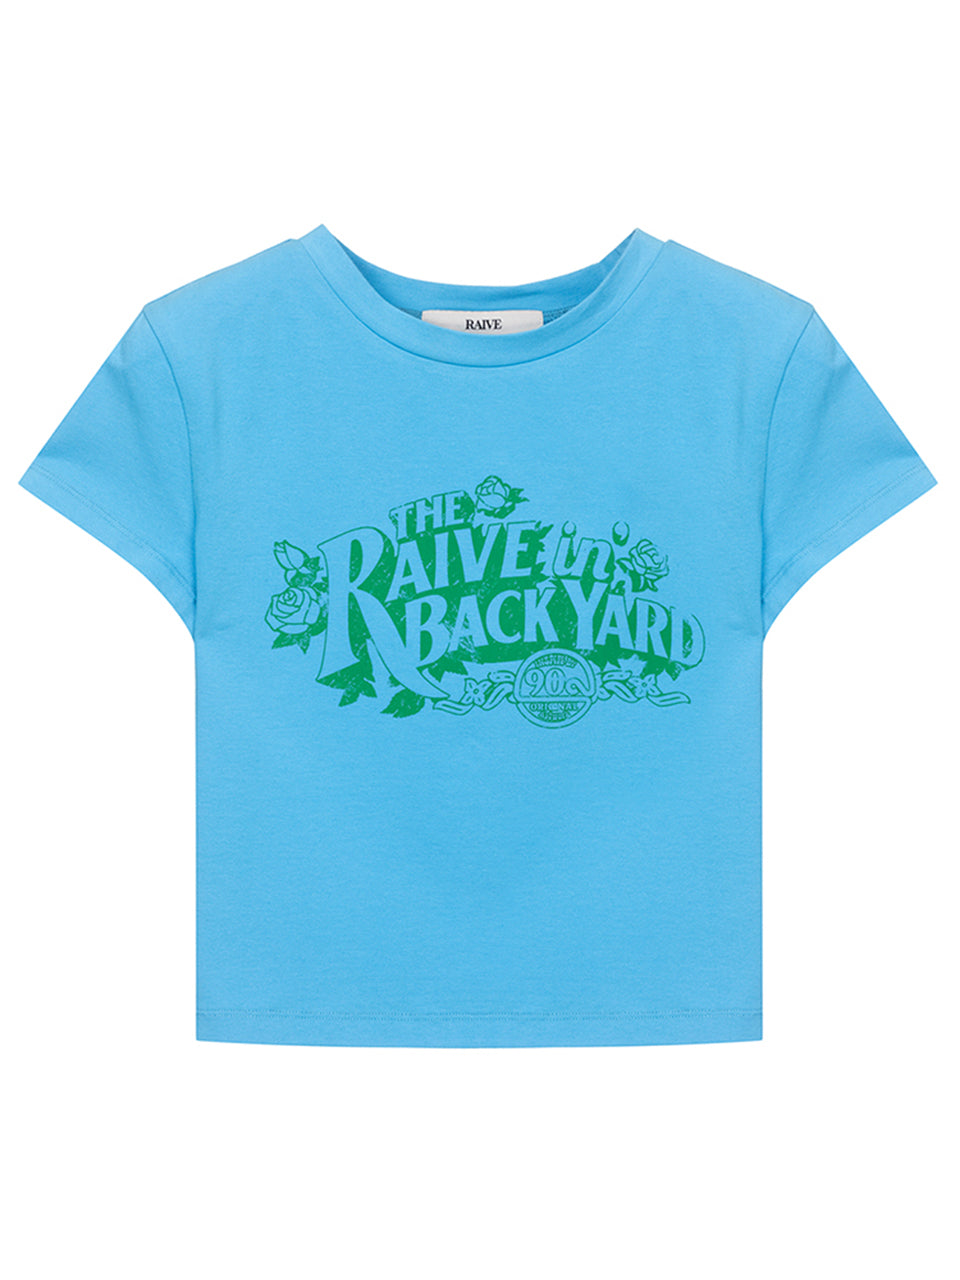 Back Yard Graphic T-shirt in Blue